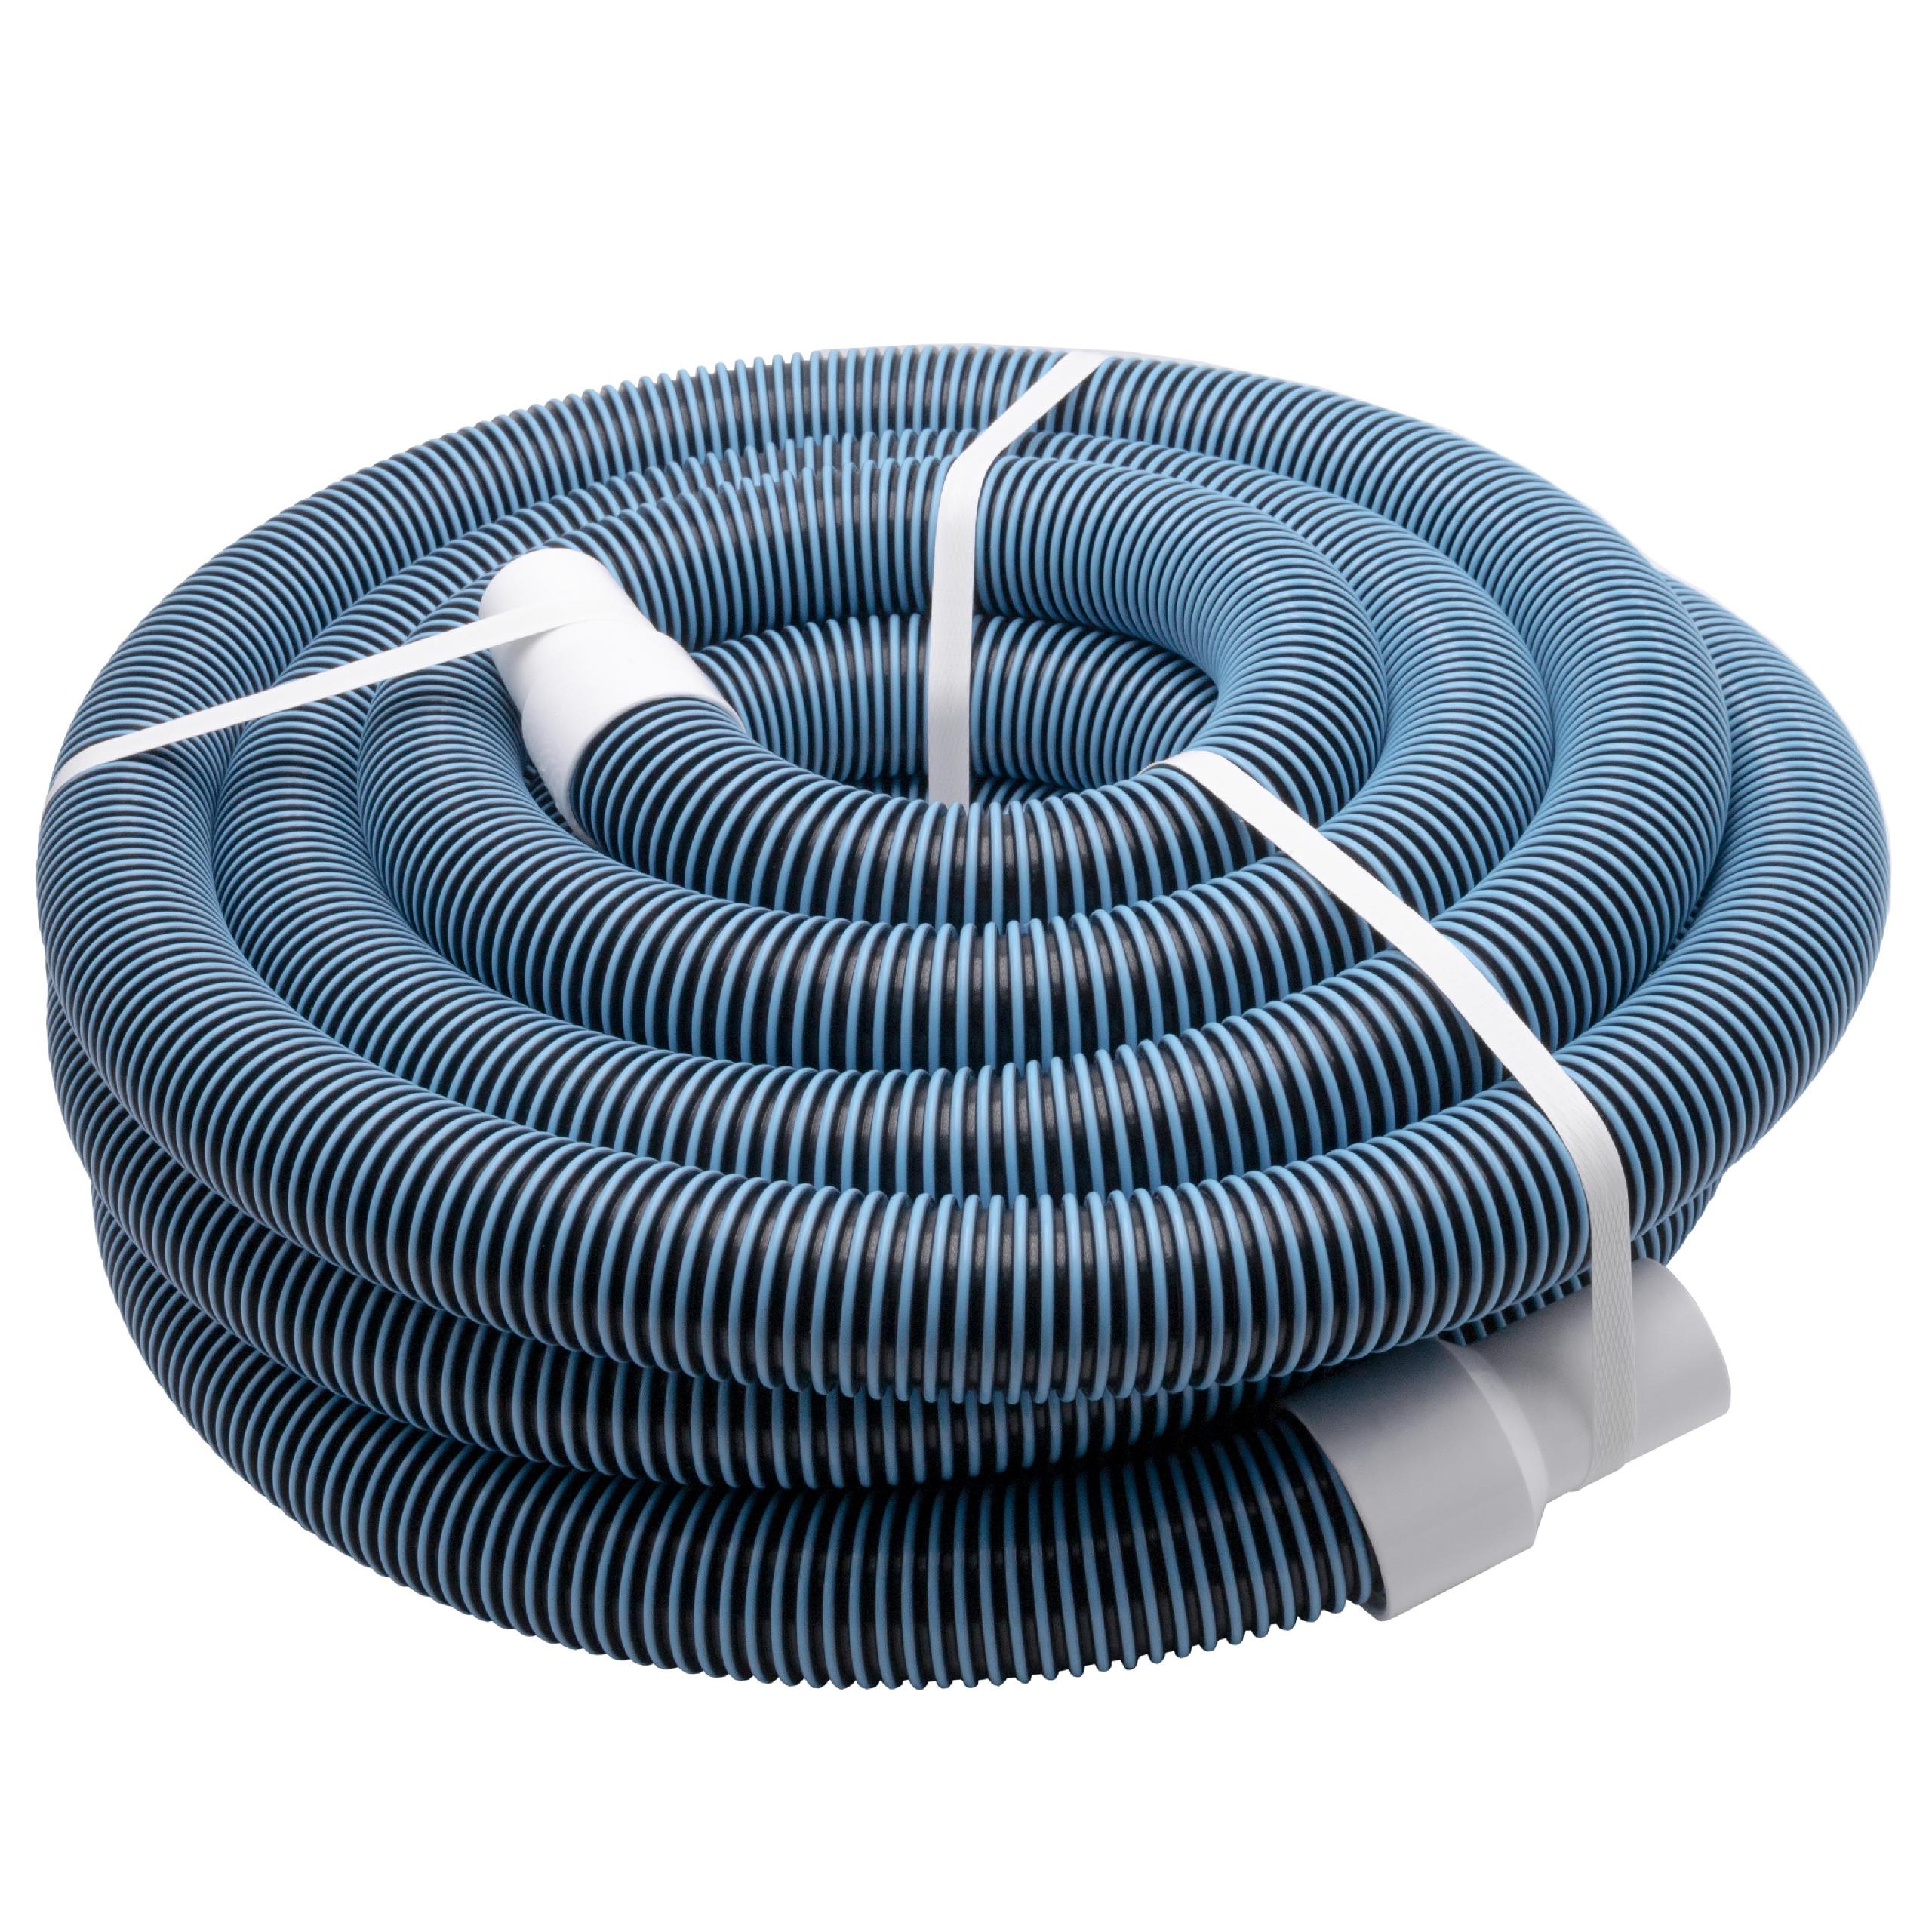 Hose Pipe suitable for Skimmer, Filter, Pool Cleaner Robot - connector 38 mm, 11 m